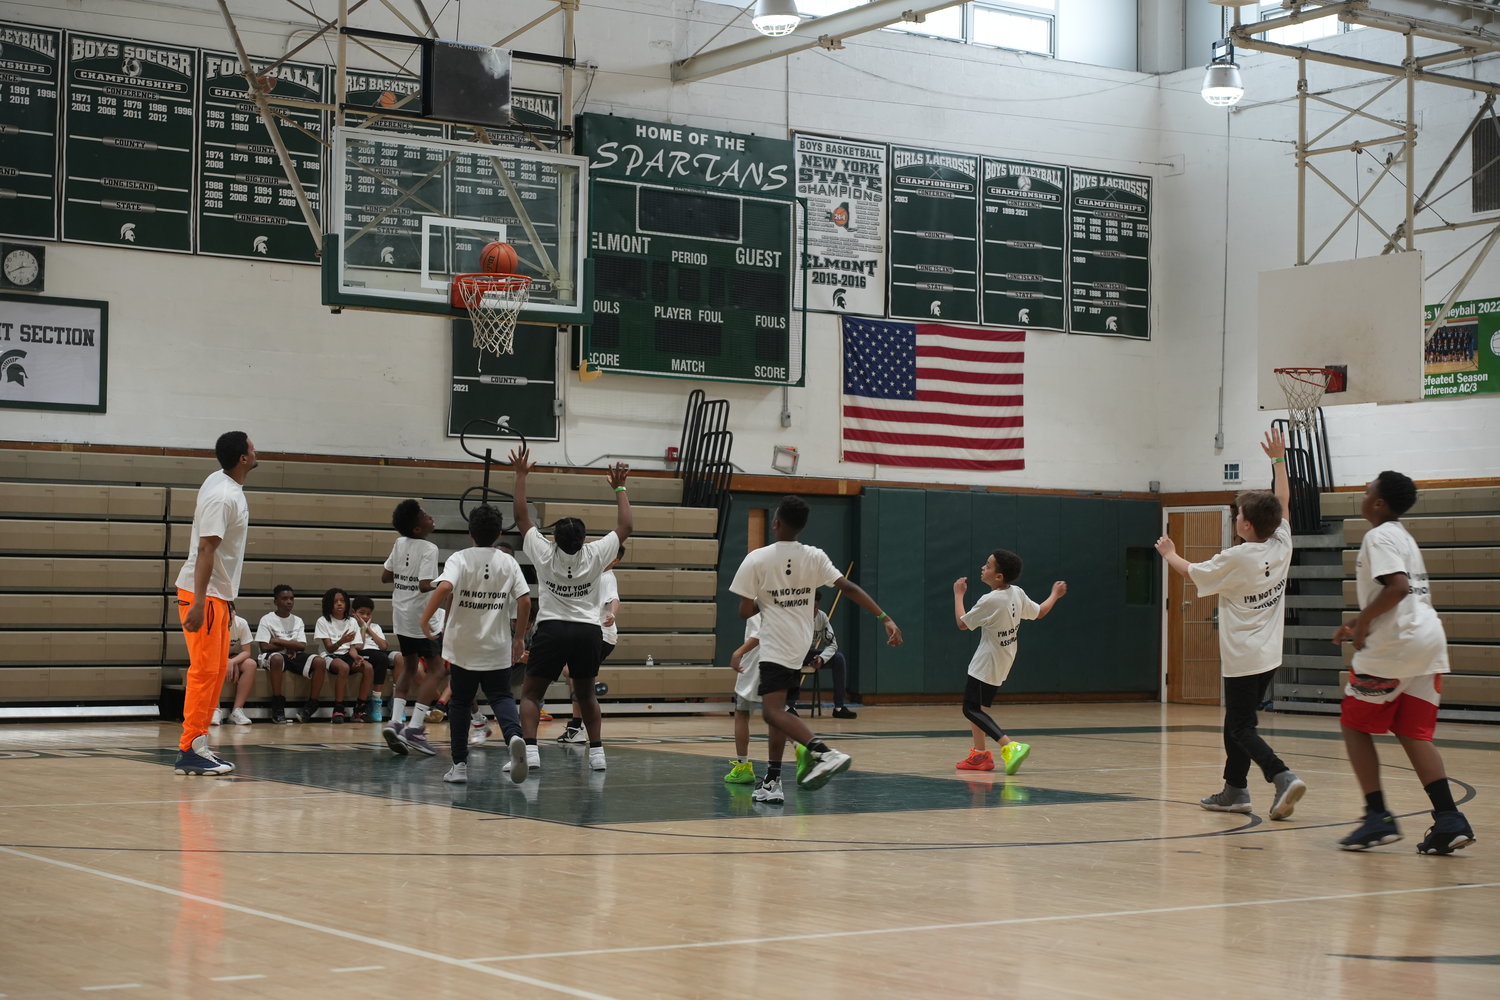 The young players took part in some friendly competition on the Elmont High School Spartan basketball court.